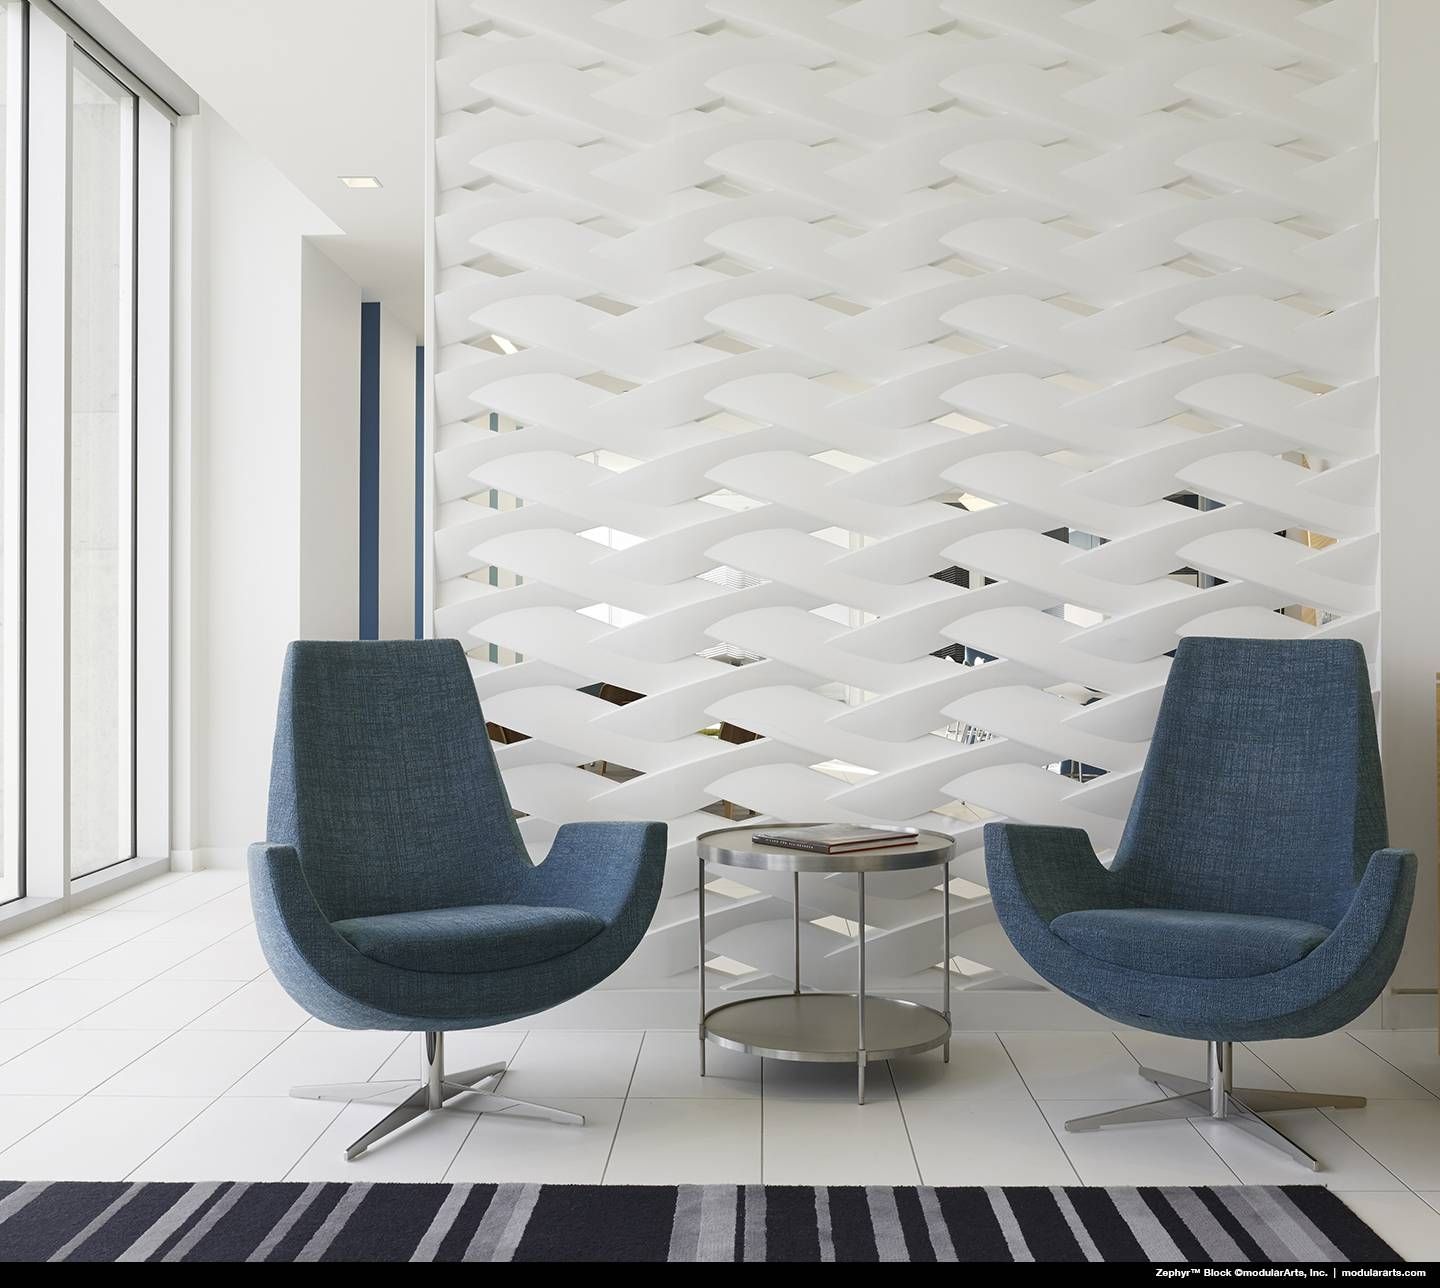 Interlockingrock® Blocks For Screen Wall Partitions | Modulararts® With Regard To Most Up To Date Modular Wall Art (Gallery 21 of 25)